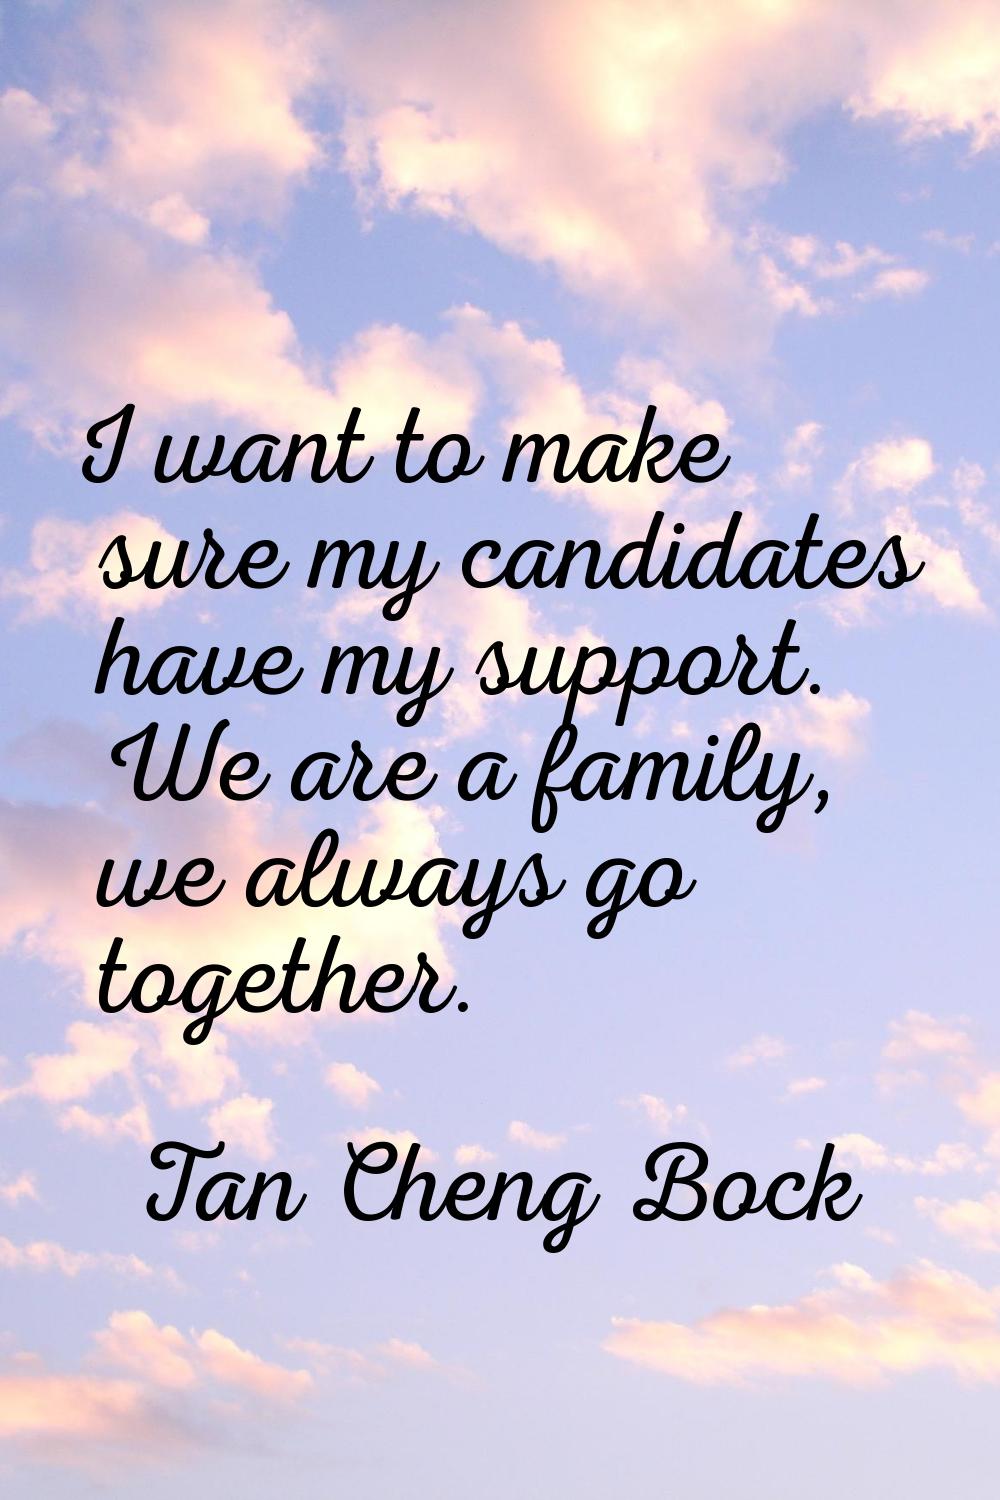 I want to make sure my candidates have my support. We are a family, we always go together.